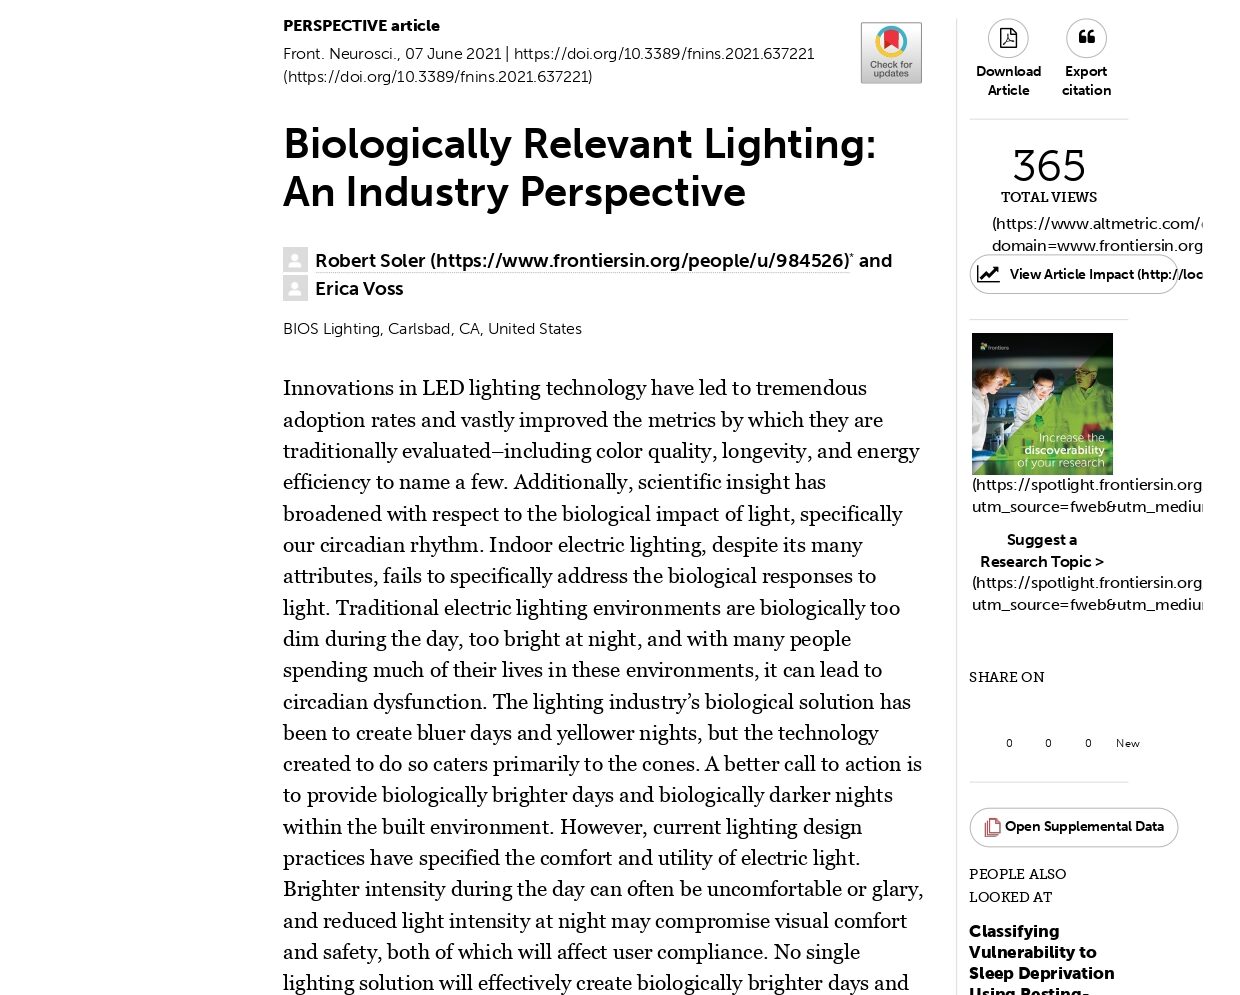 Biologically Relevant Lighting: An Industry Perspective